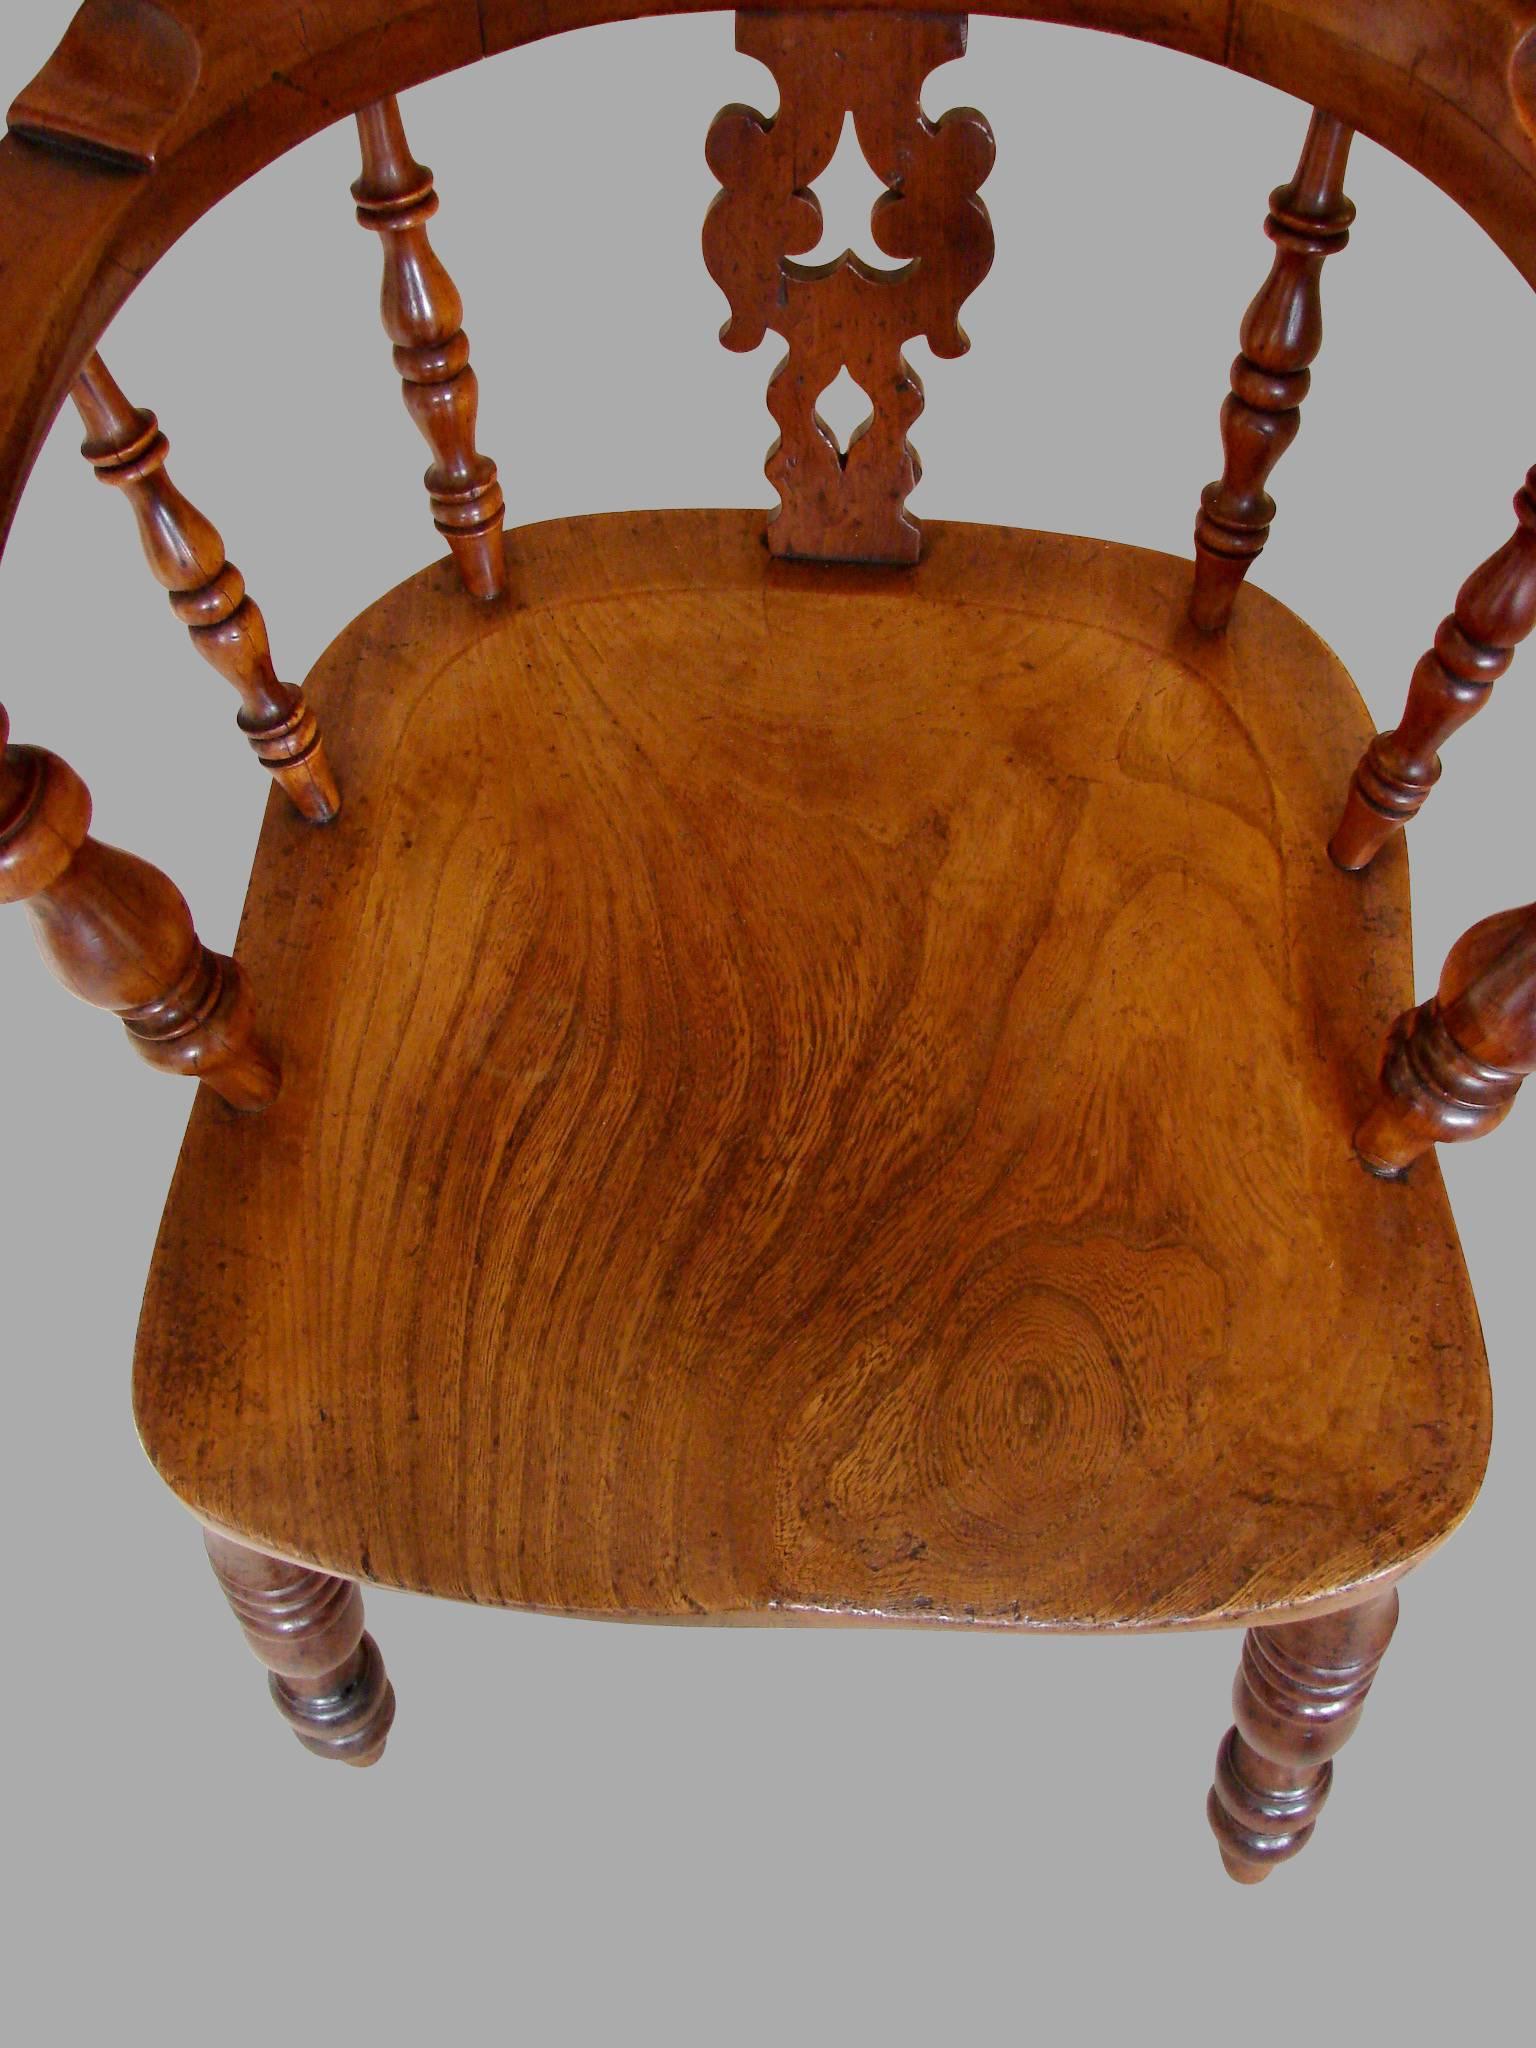 wooden seat with high back and arms